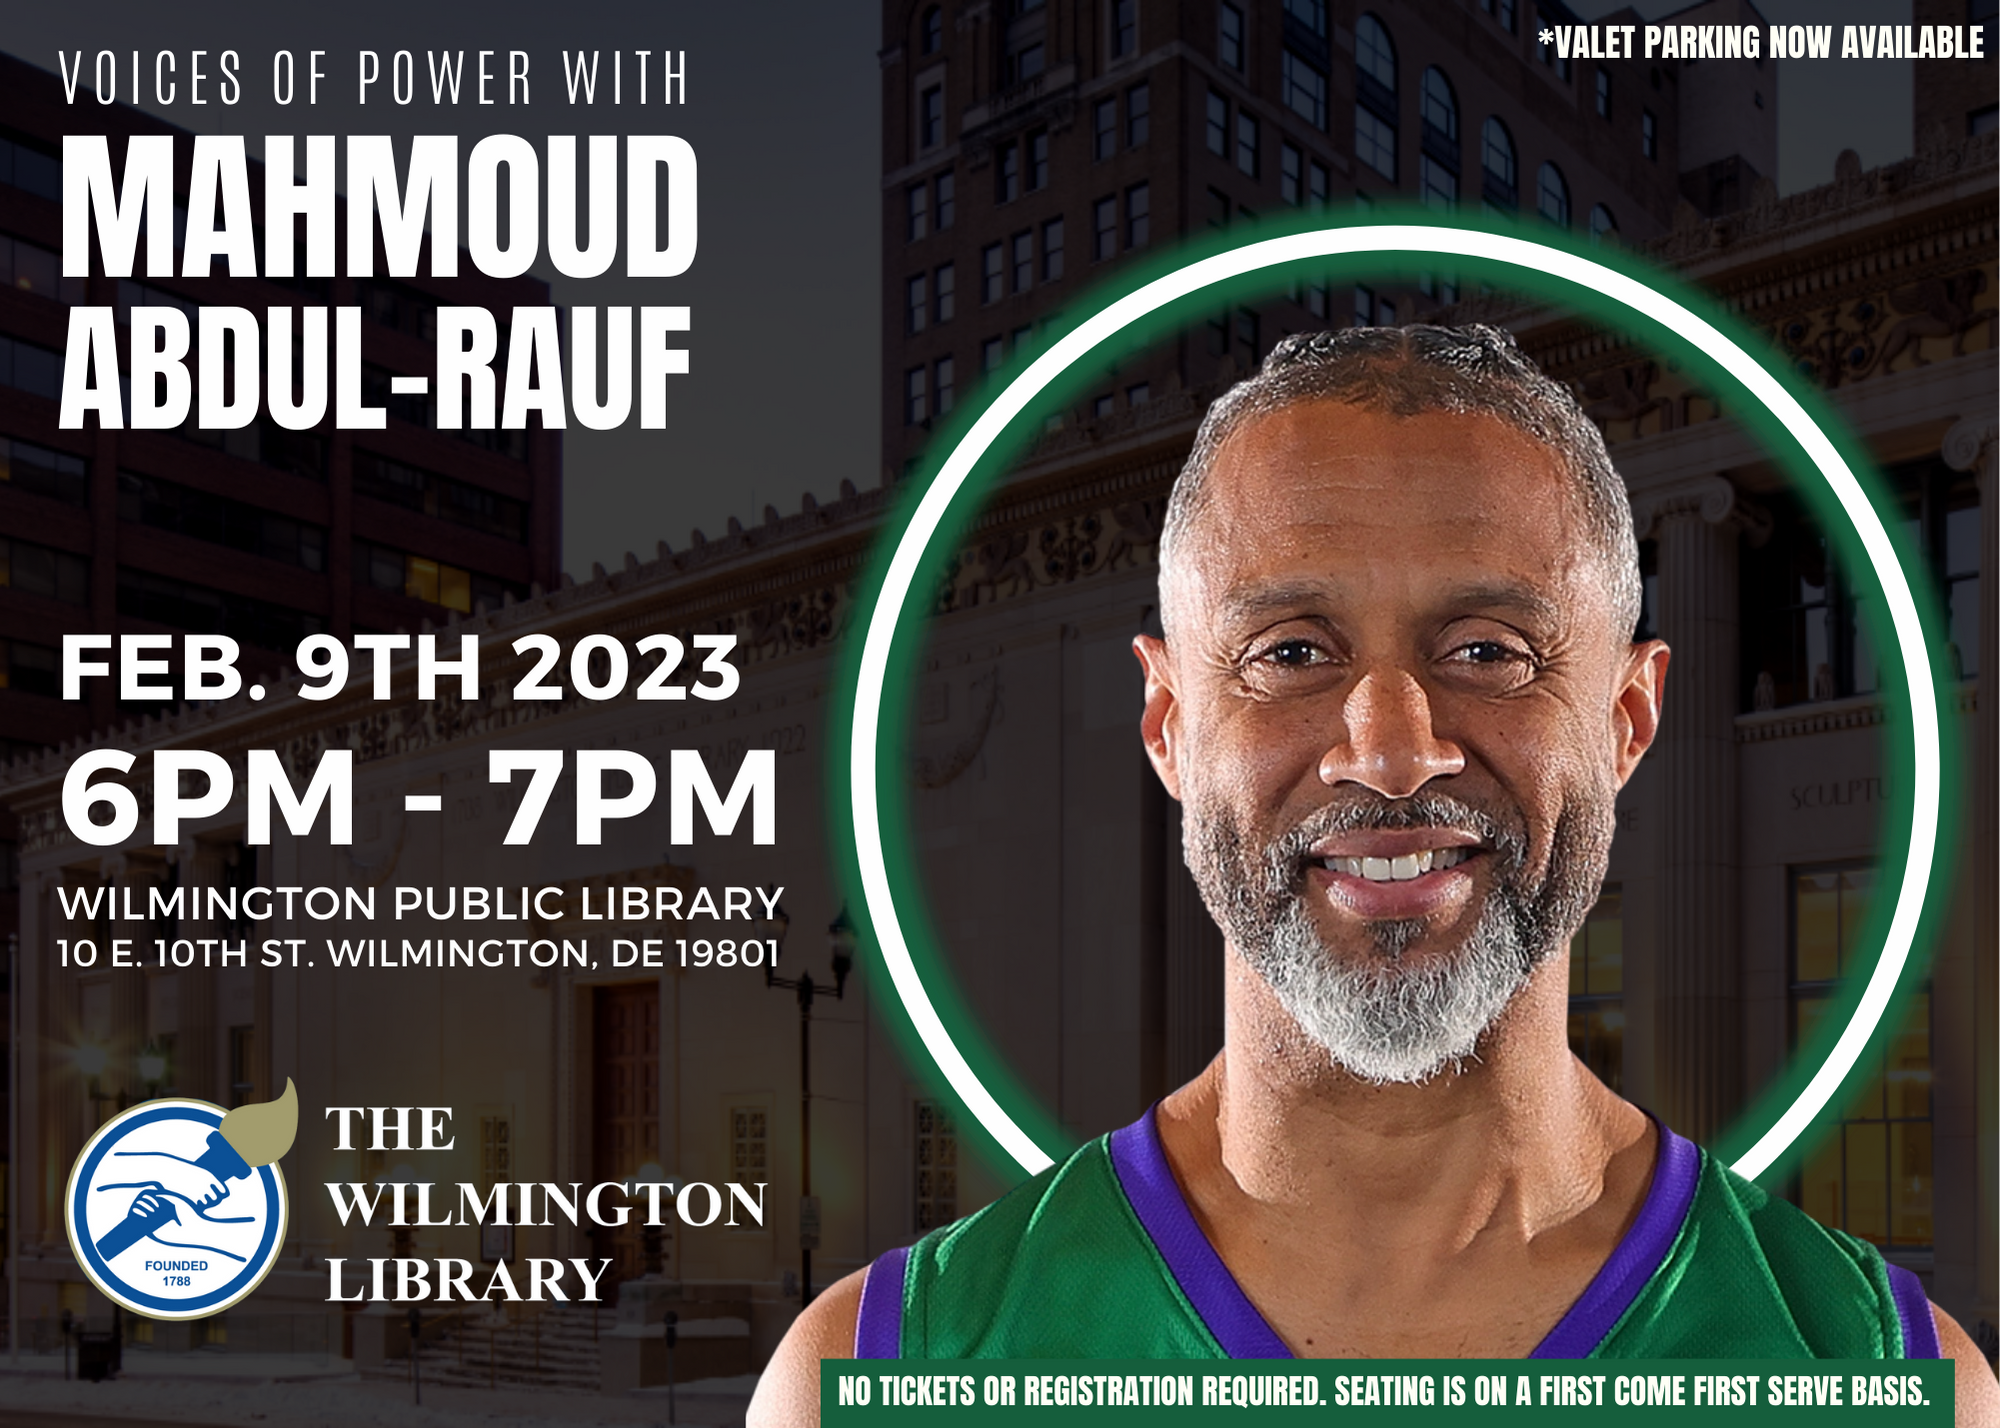 Mahmoud Abdul-Rauf is a role model for our time